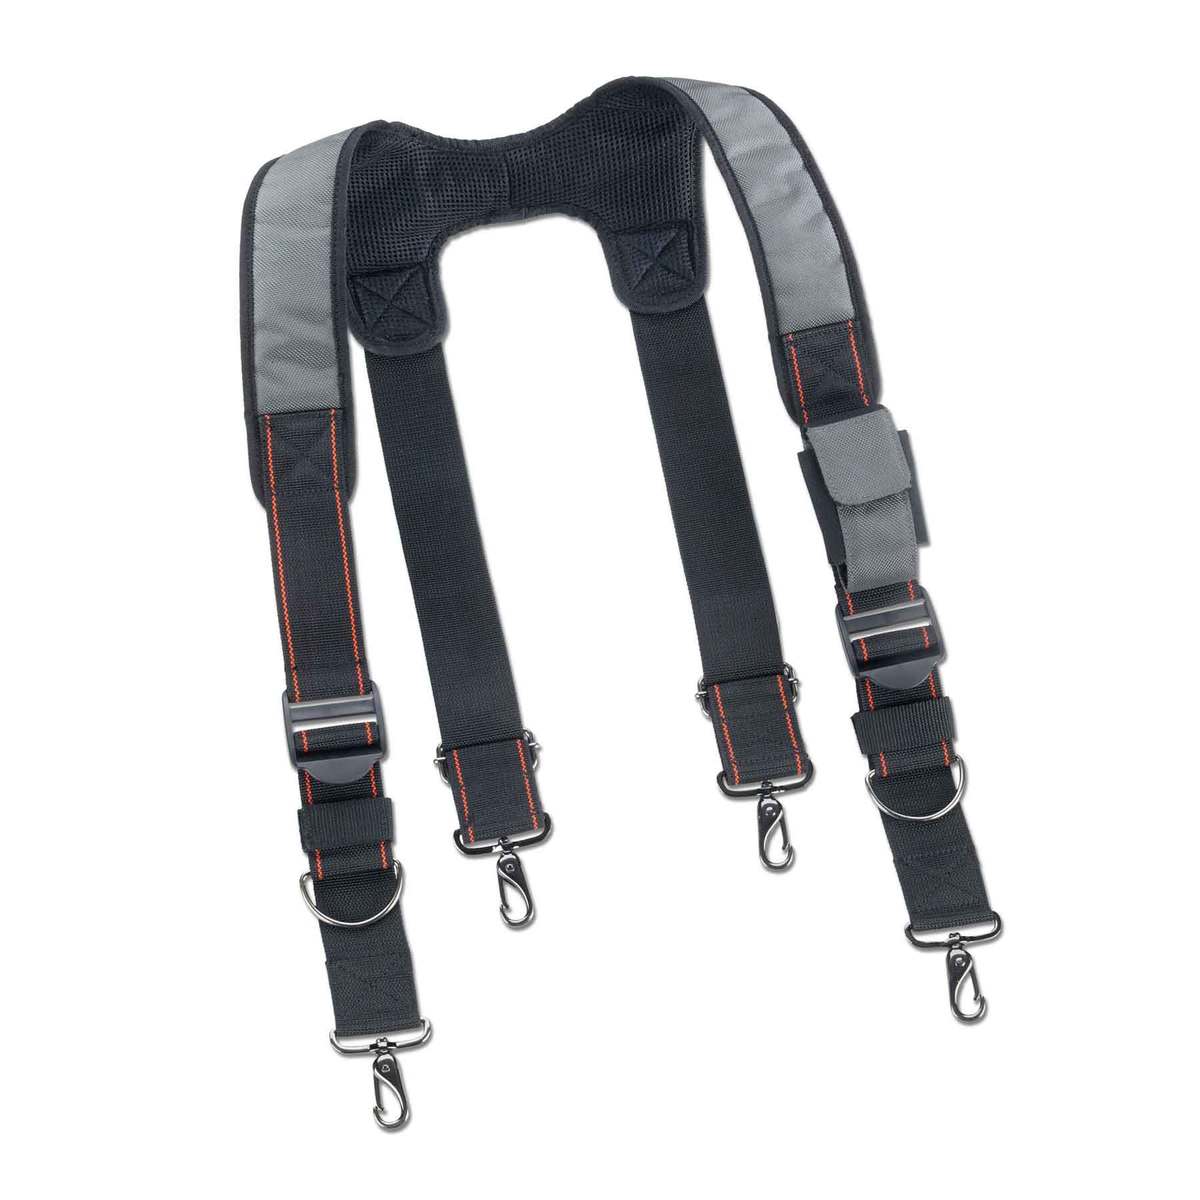 Ergodyne One Size Fits All Gray Arsenal® 5560 Polyester Suspenders